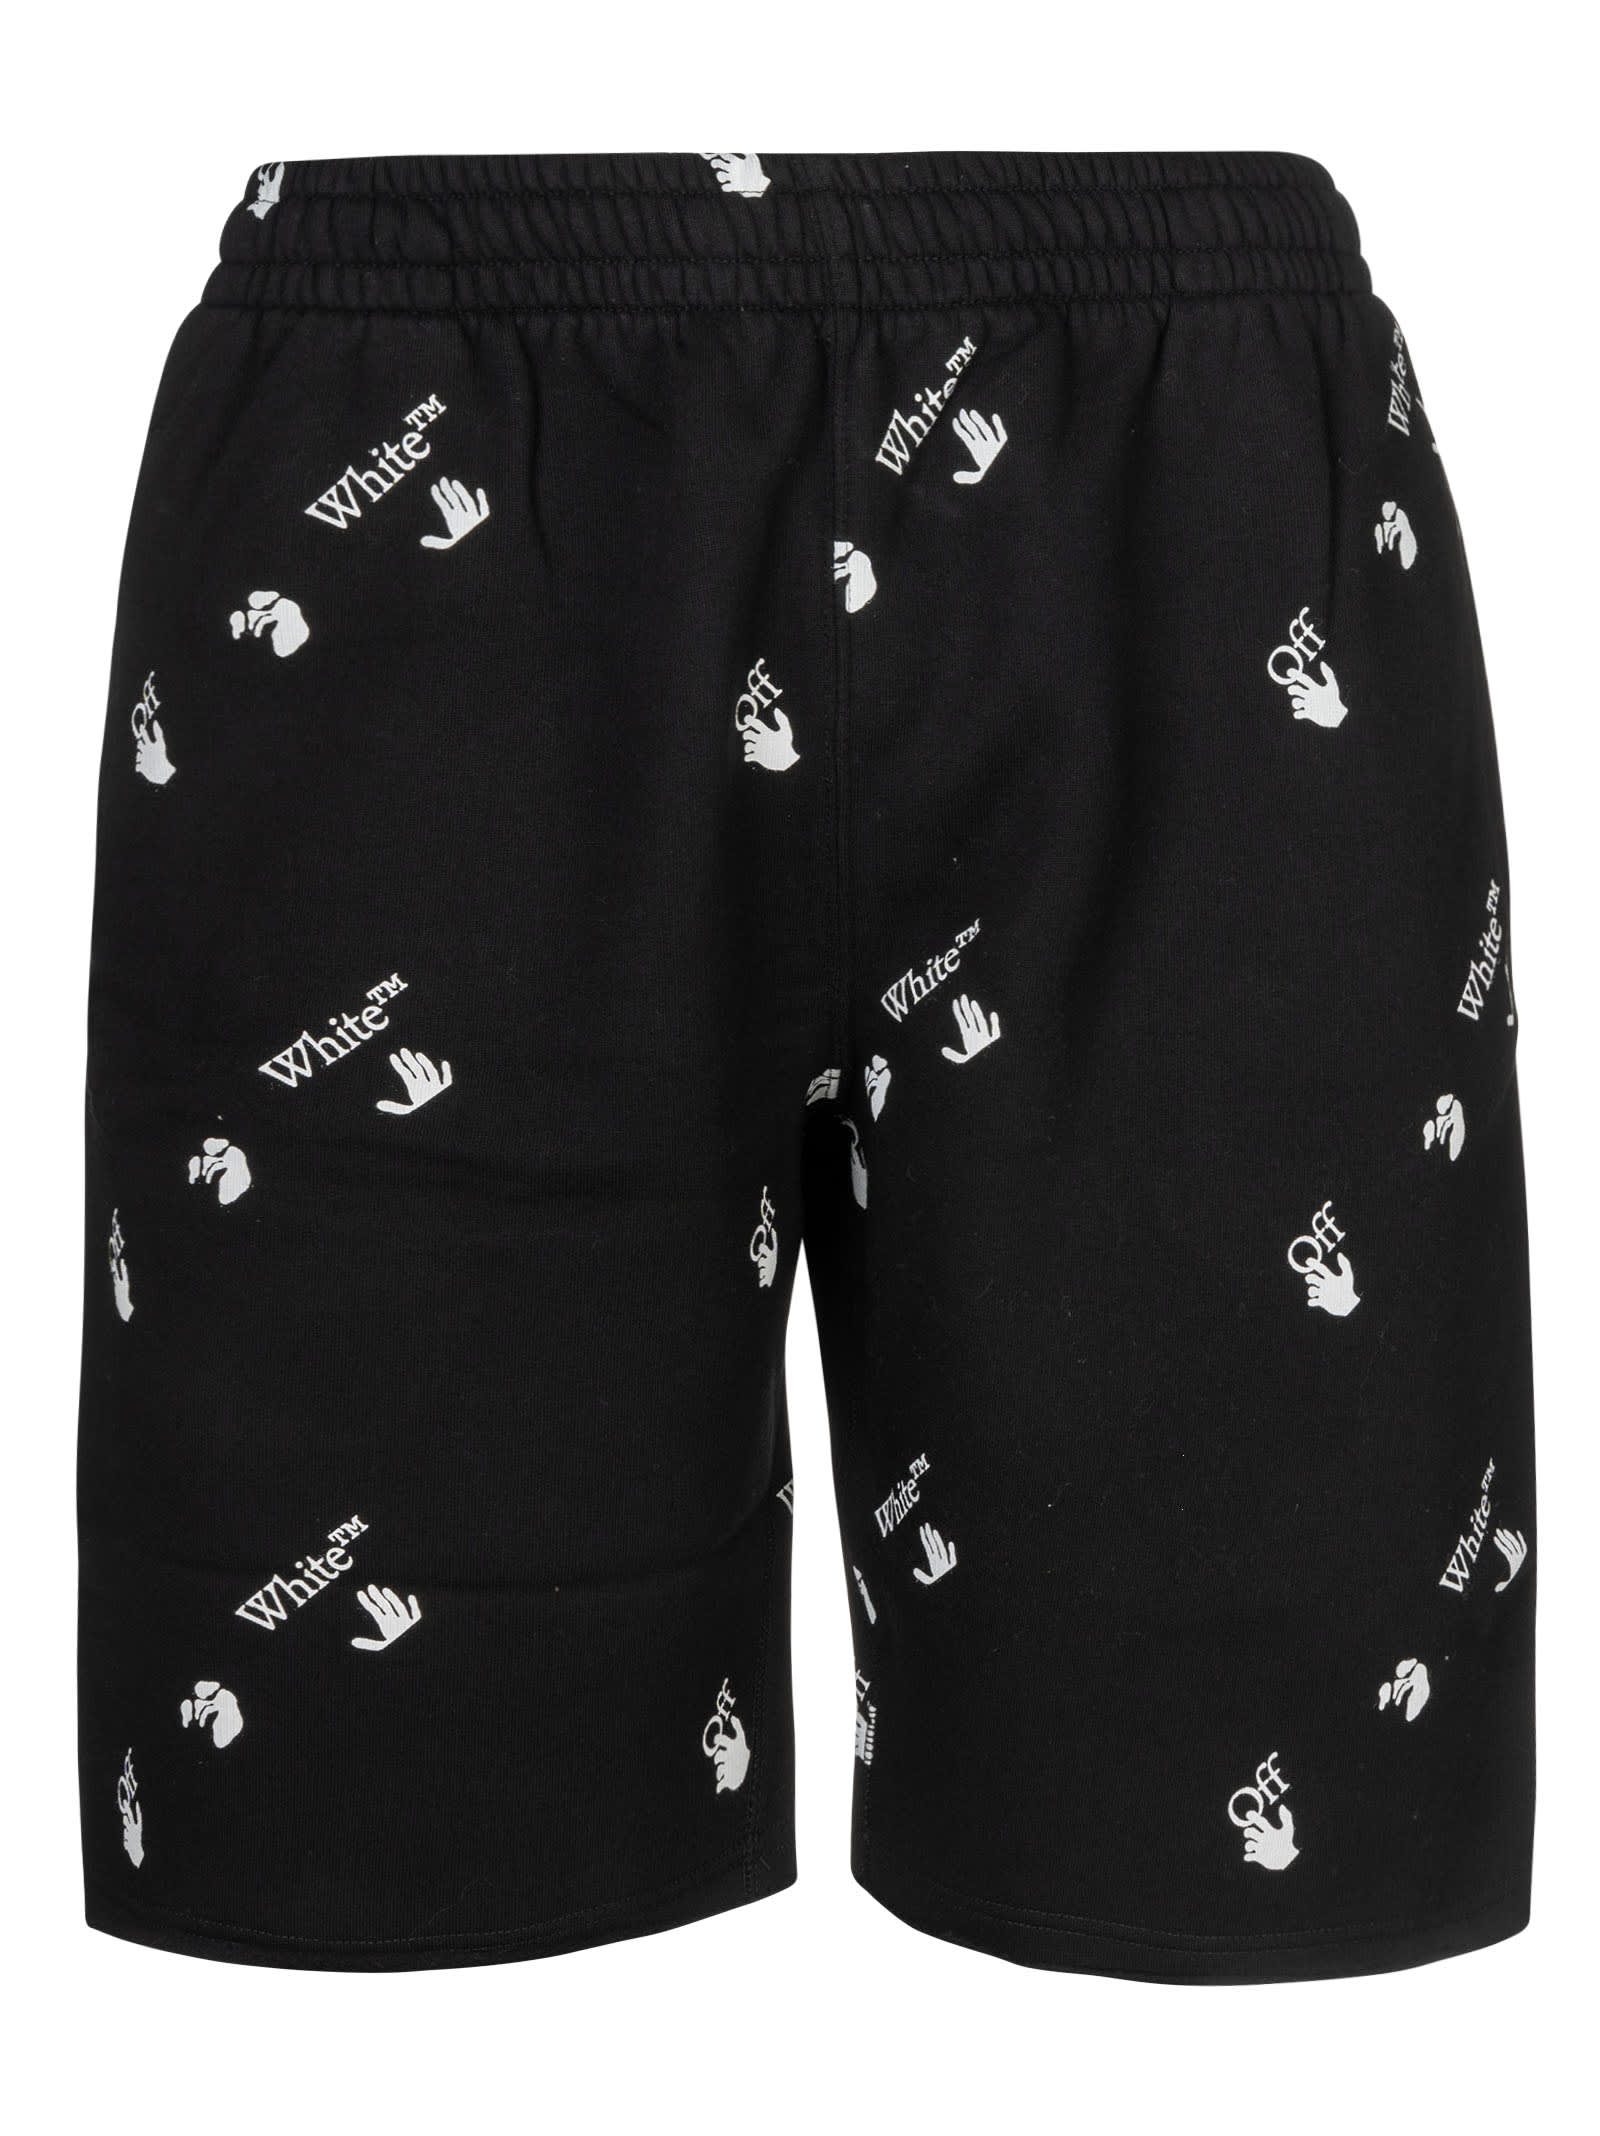 OFF-WHITE OW ALL-OVER TRACK SHORTS,OMCI006R21FLE003 1001 BLACK WHITE